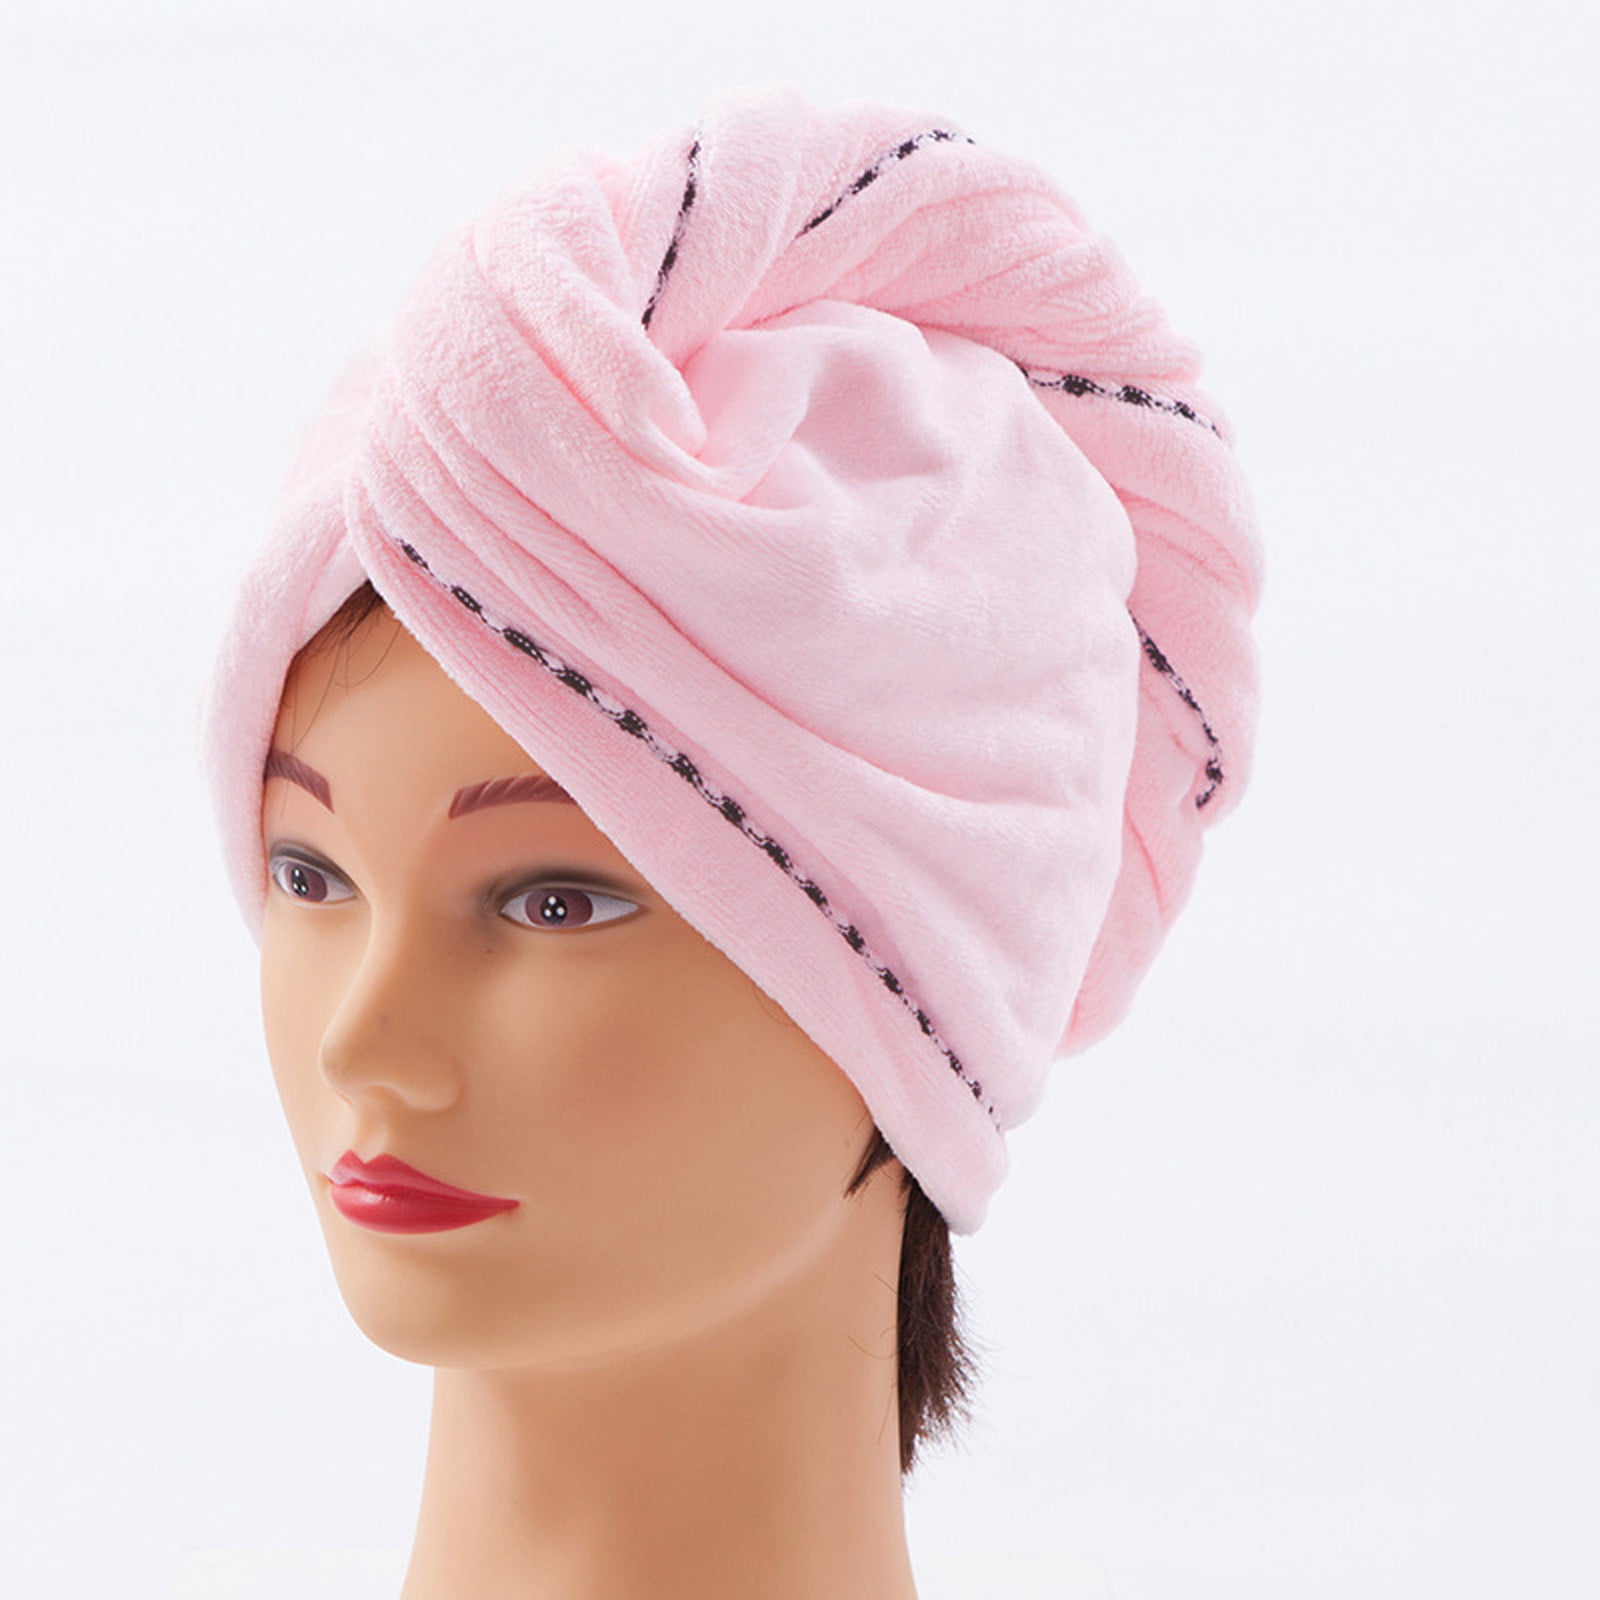 Details about   1 Coral fleece absorbent quick-drying cap absorbent towel wrap turban shower cap 